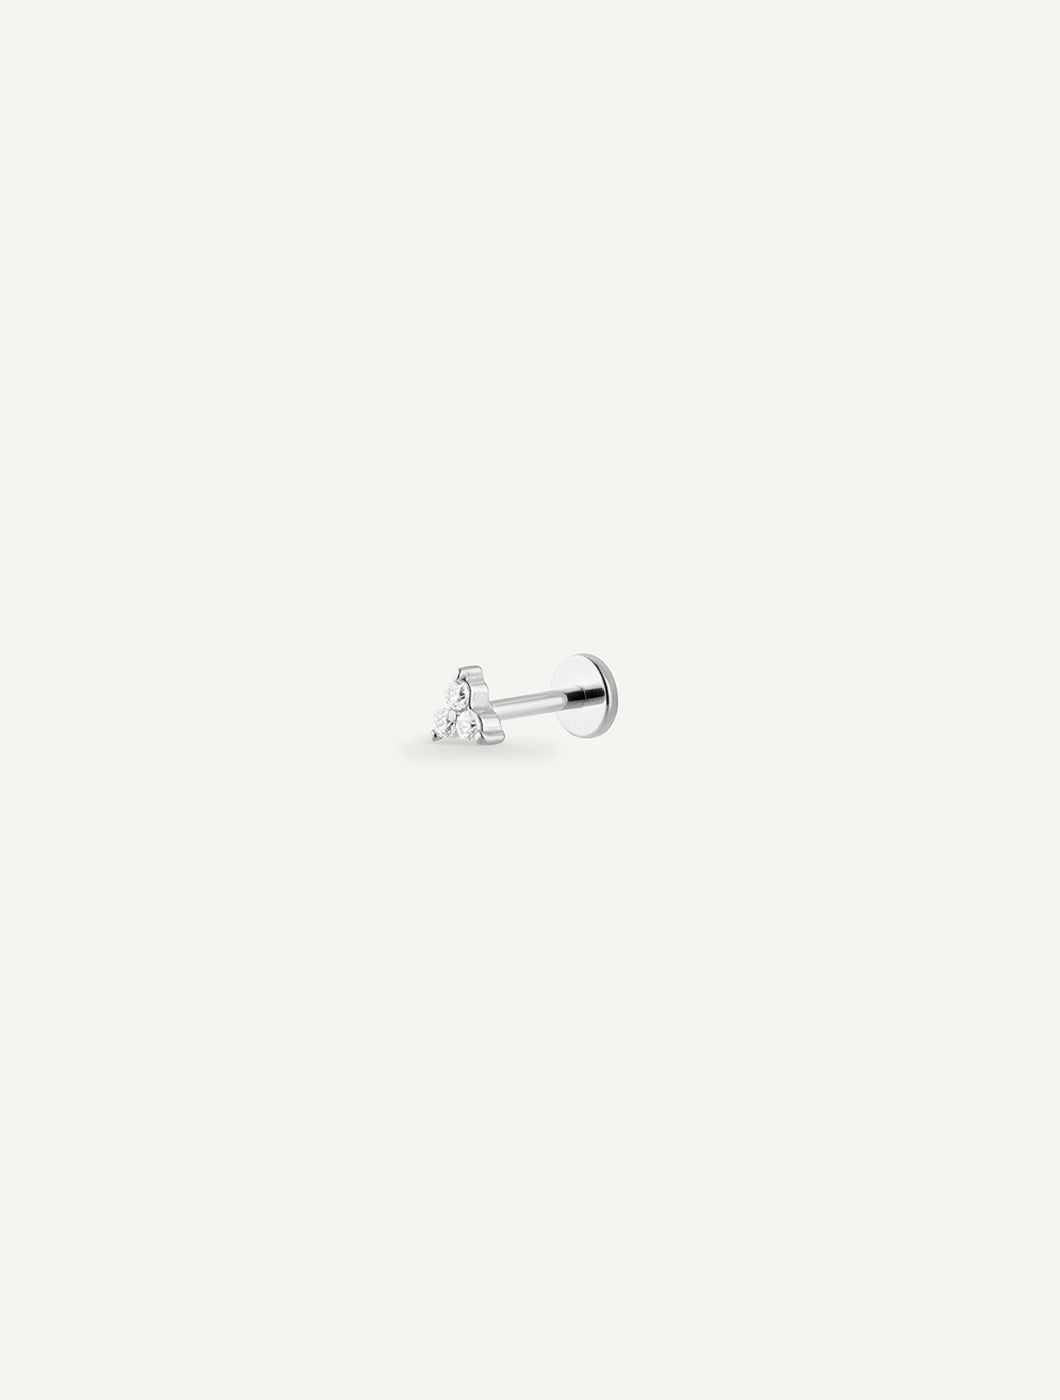 KIKICHIC | NYC | Tragus Helix Cartilage Beaded Tiny Huggies Small Hoops 6  mm| Sterling Silver Mini Beads Hoops in Silver, 18k Gold and Rose Gold.